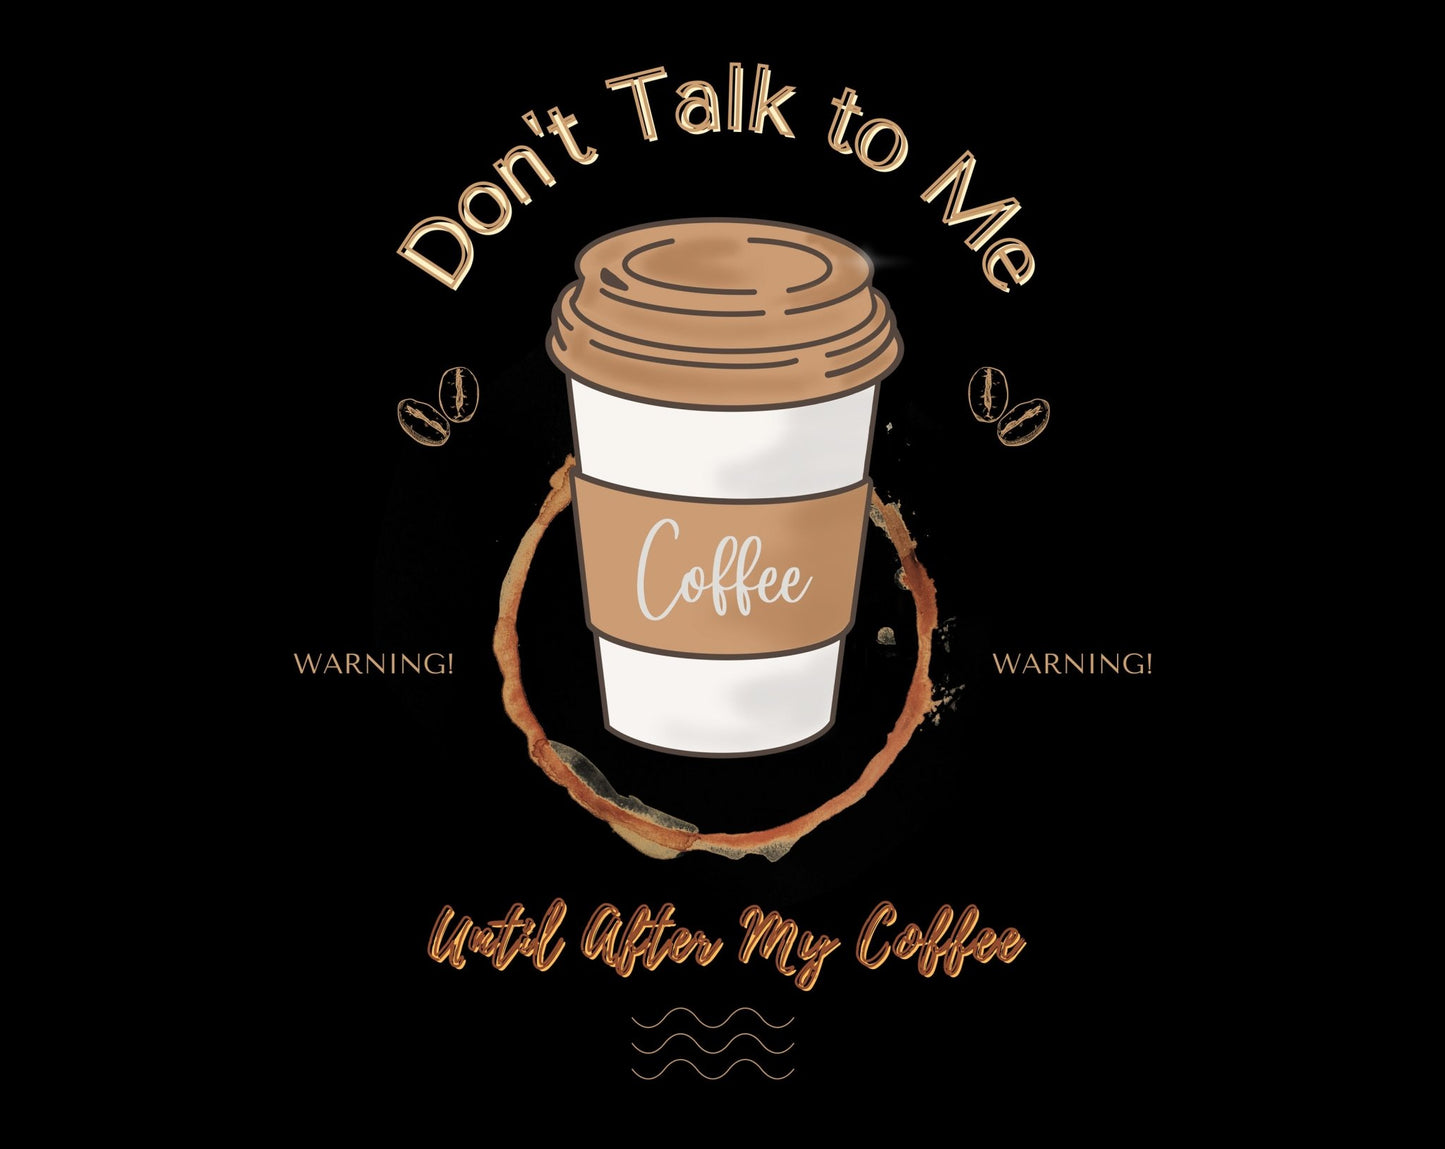 Don't Talk to Me Until After My Coffee Heavy Cotton Tee